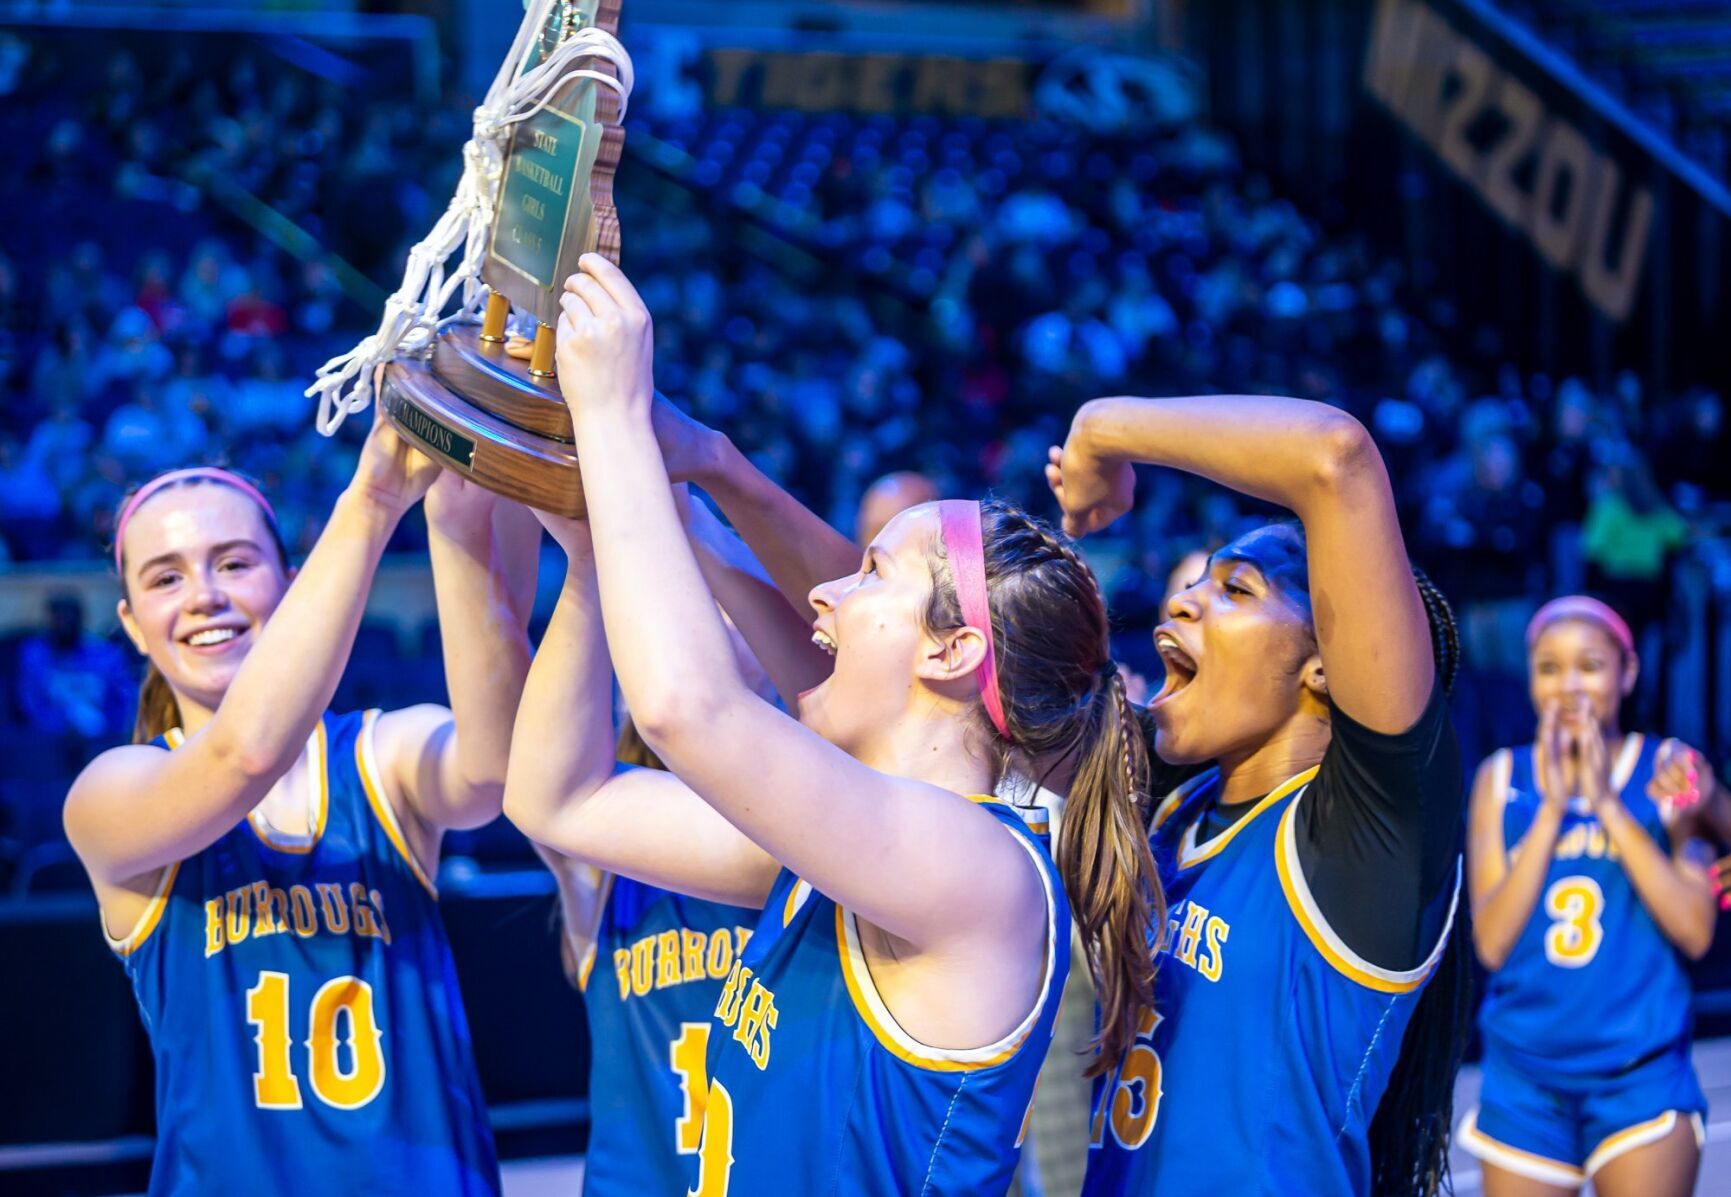 John Burroughs Dominates Lutheran St. Charles to Win Second State Title in Three Years